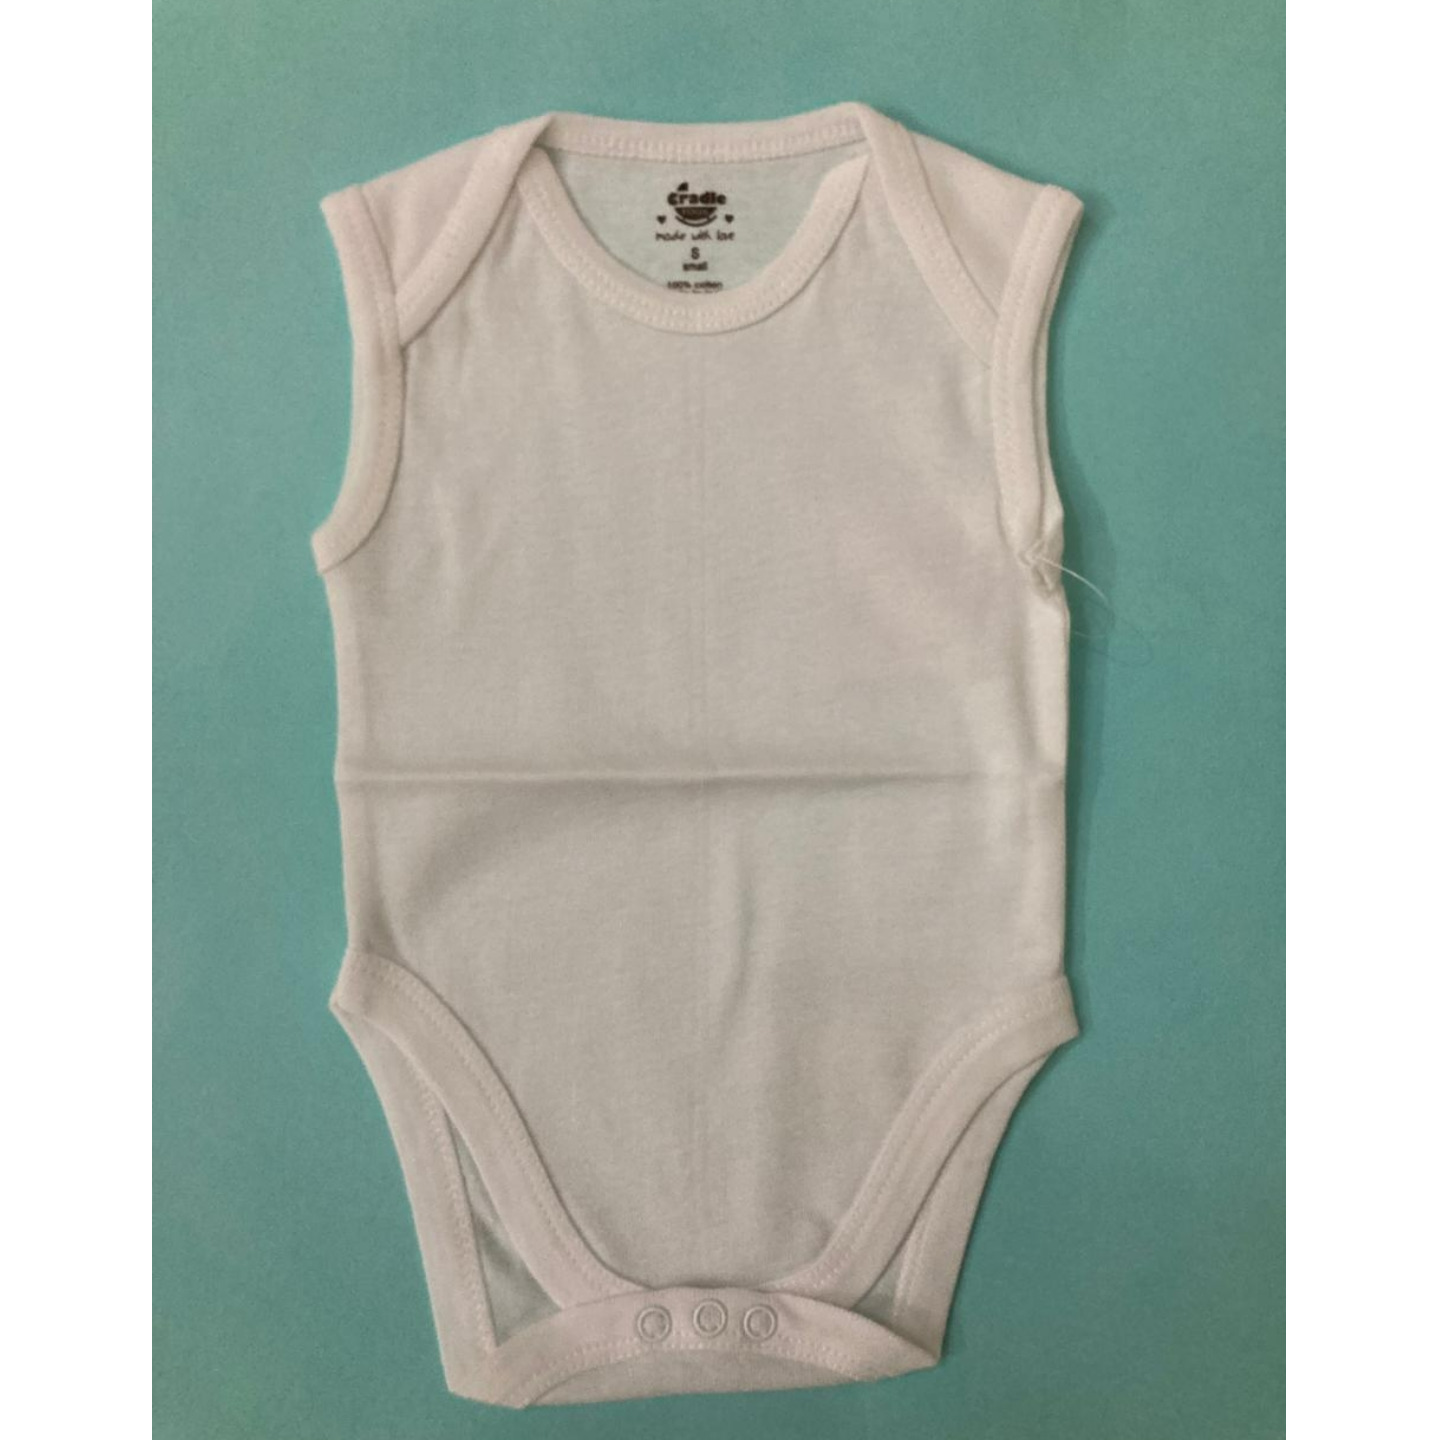 Cradle Togs White Plain Romper Rs 195 Only 6 Months to 18 Months Size